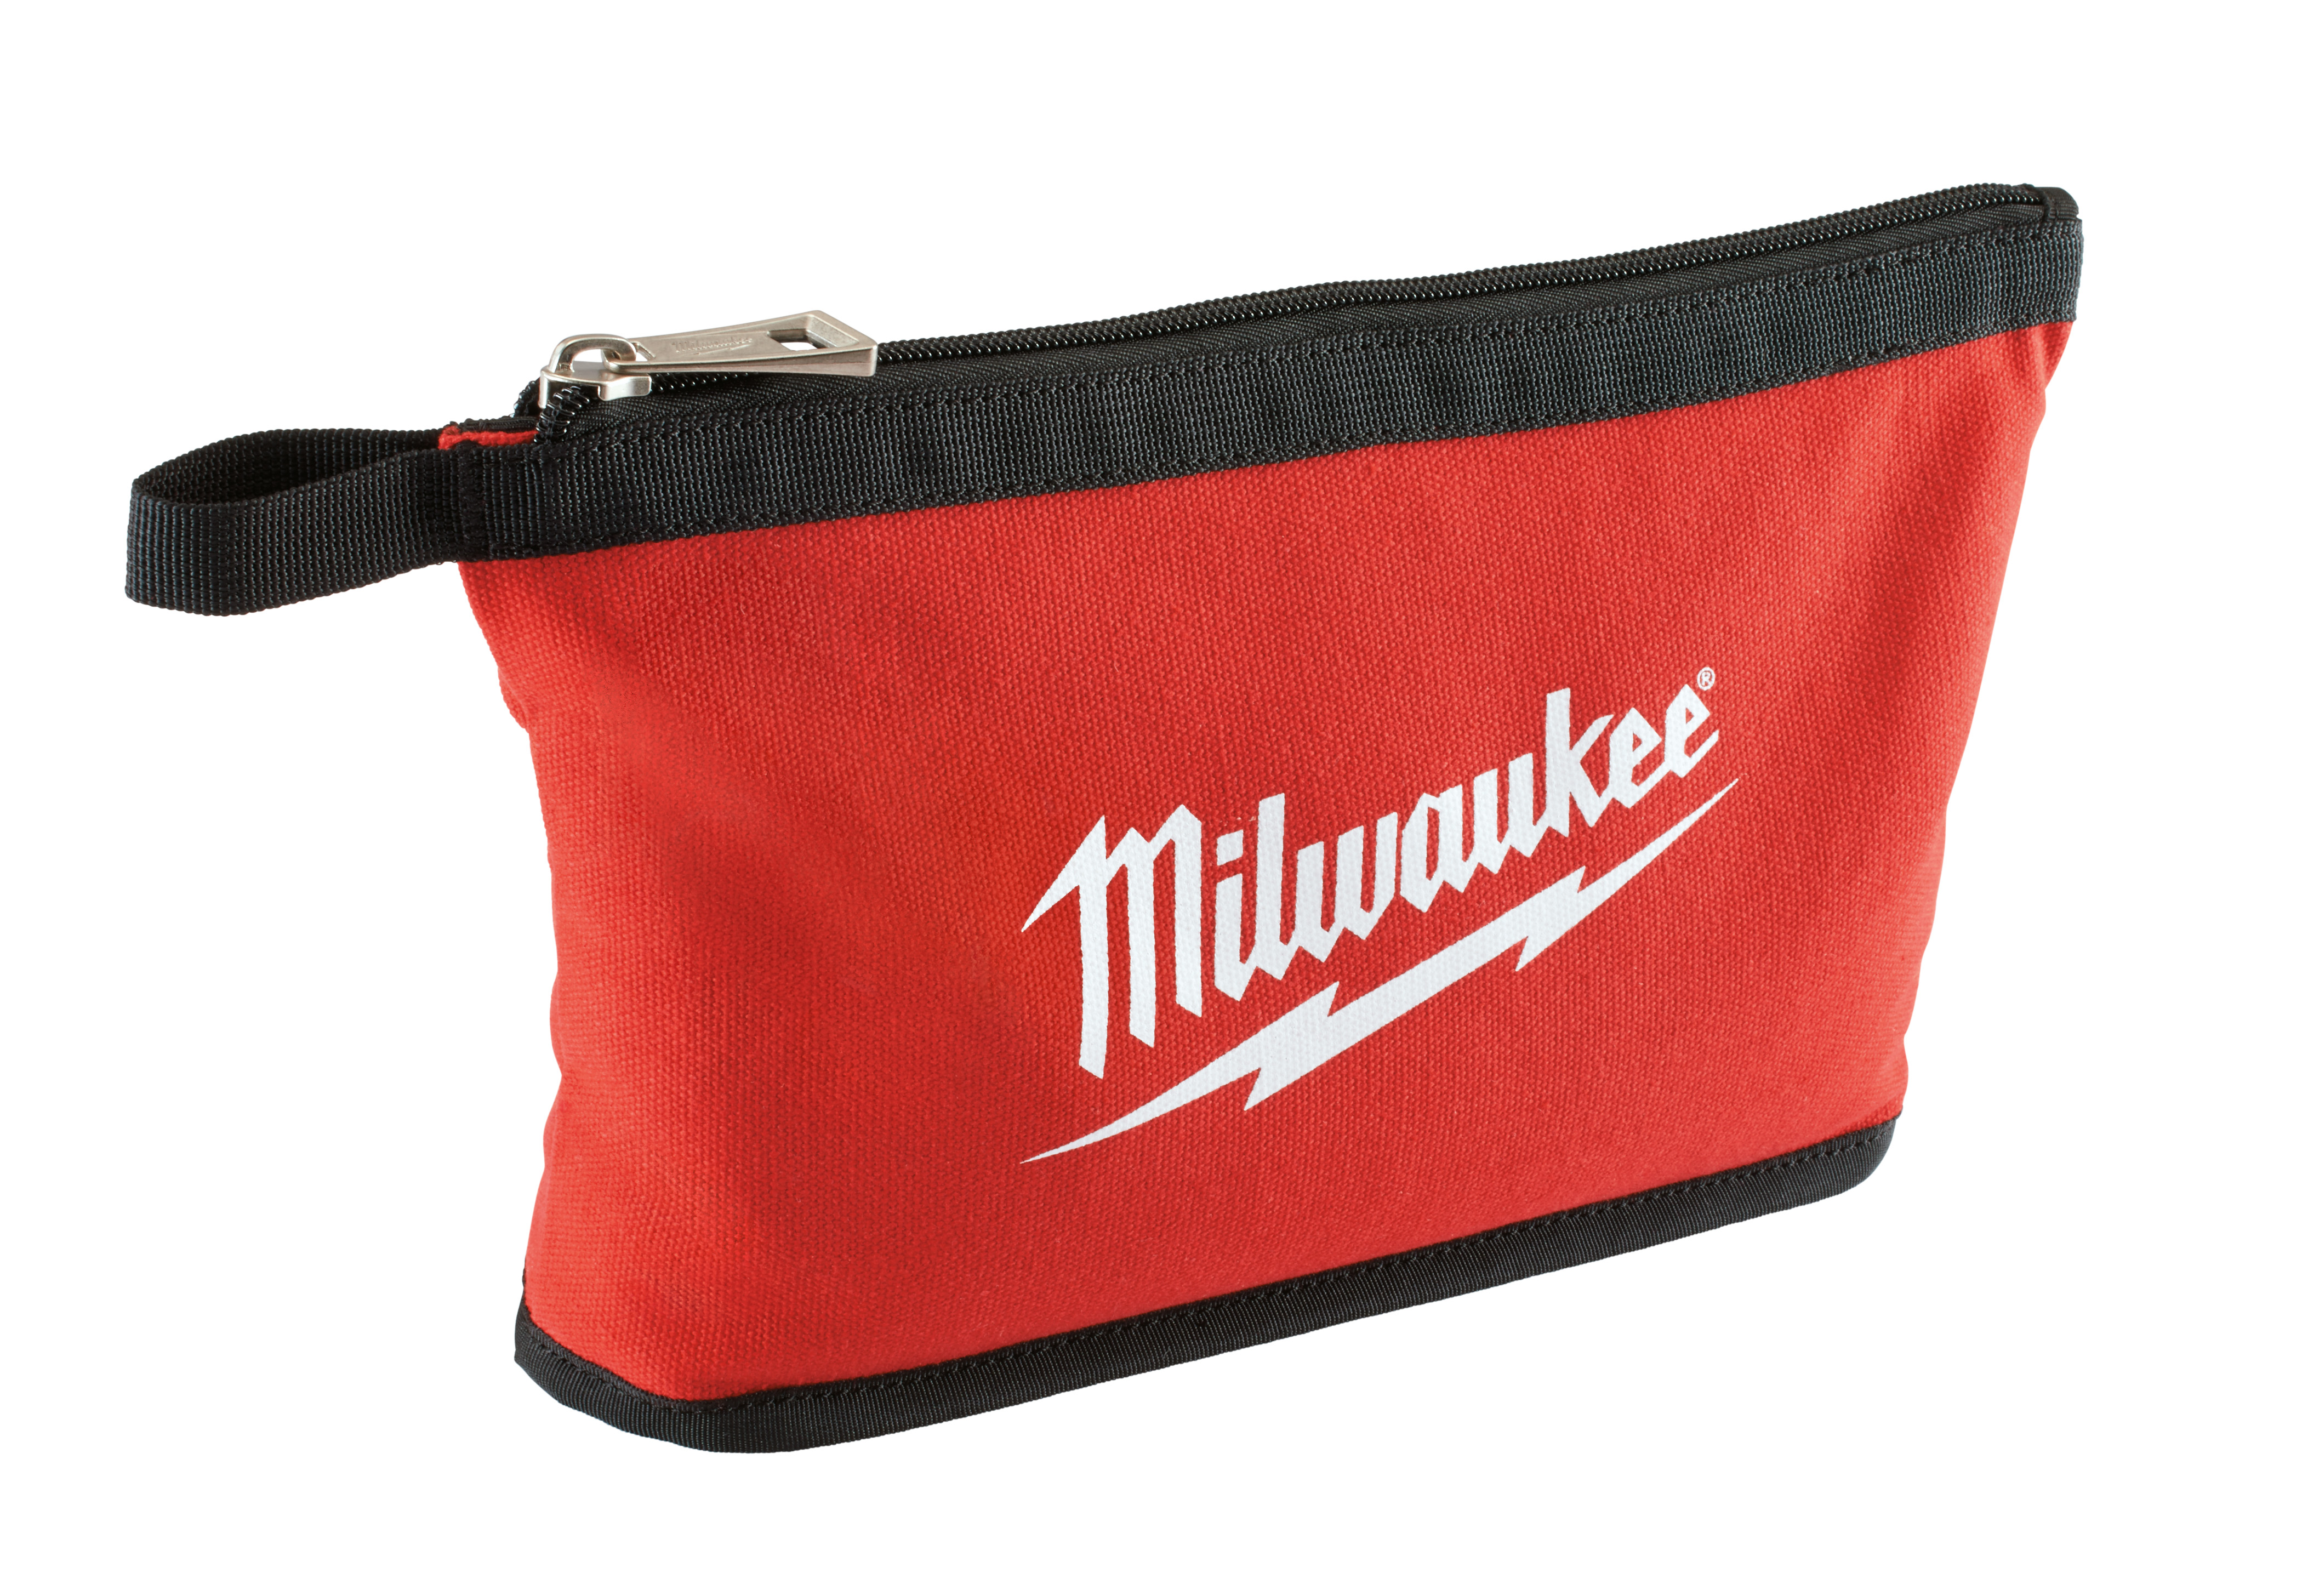 48-22-8180 045242344604 Milwaukee zipper pouches feature a breathable and durable heavy duty canvas construction, as well as a heavy duty zipper for a lifetime of use. The weather resistant resistant bottom allows easy access to the pouches interior, while protecting its contents.